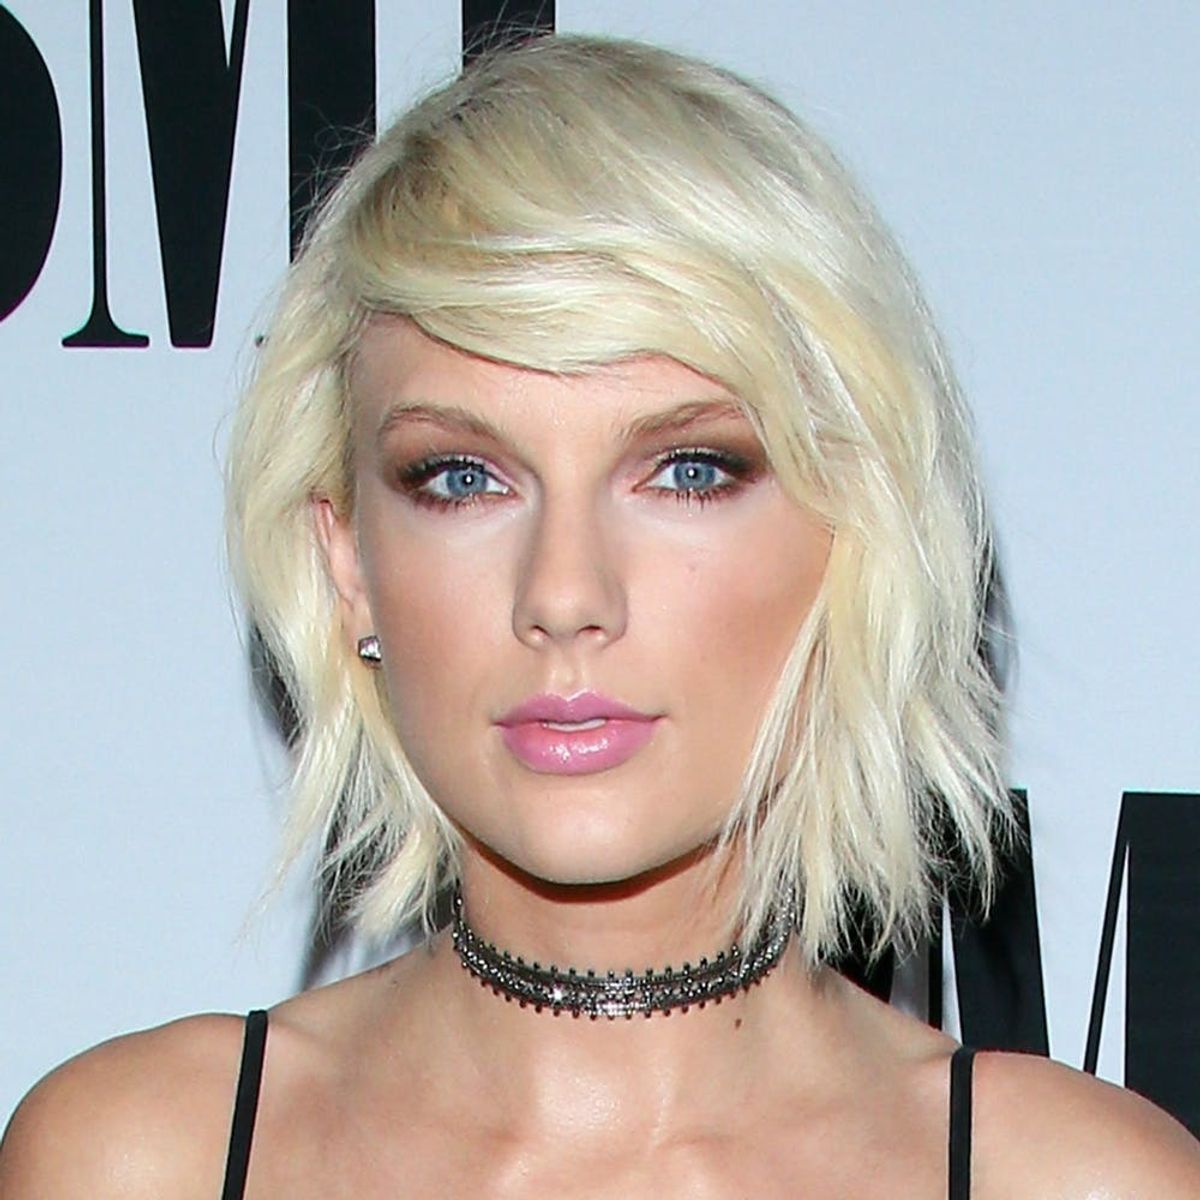 Taylor Swift Just Crashed a Wedding for This Truly Heartwarming Reason